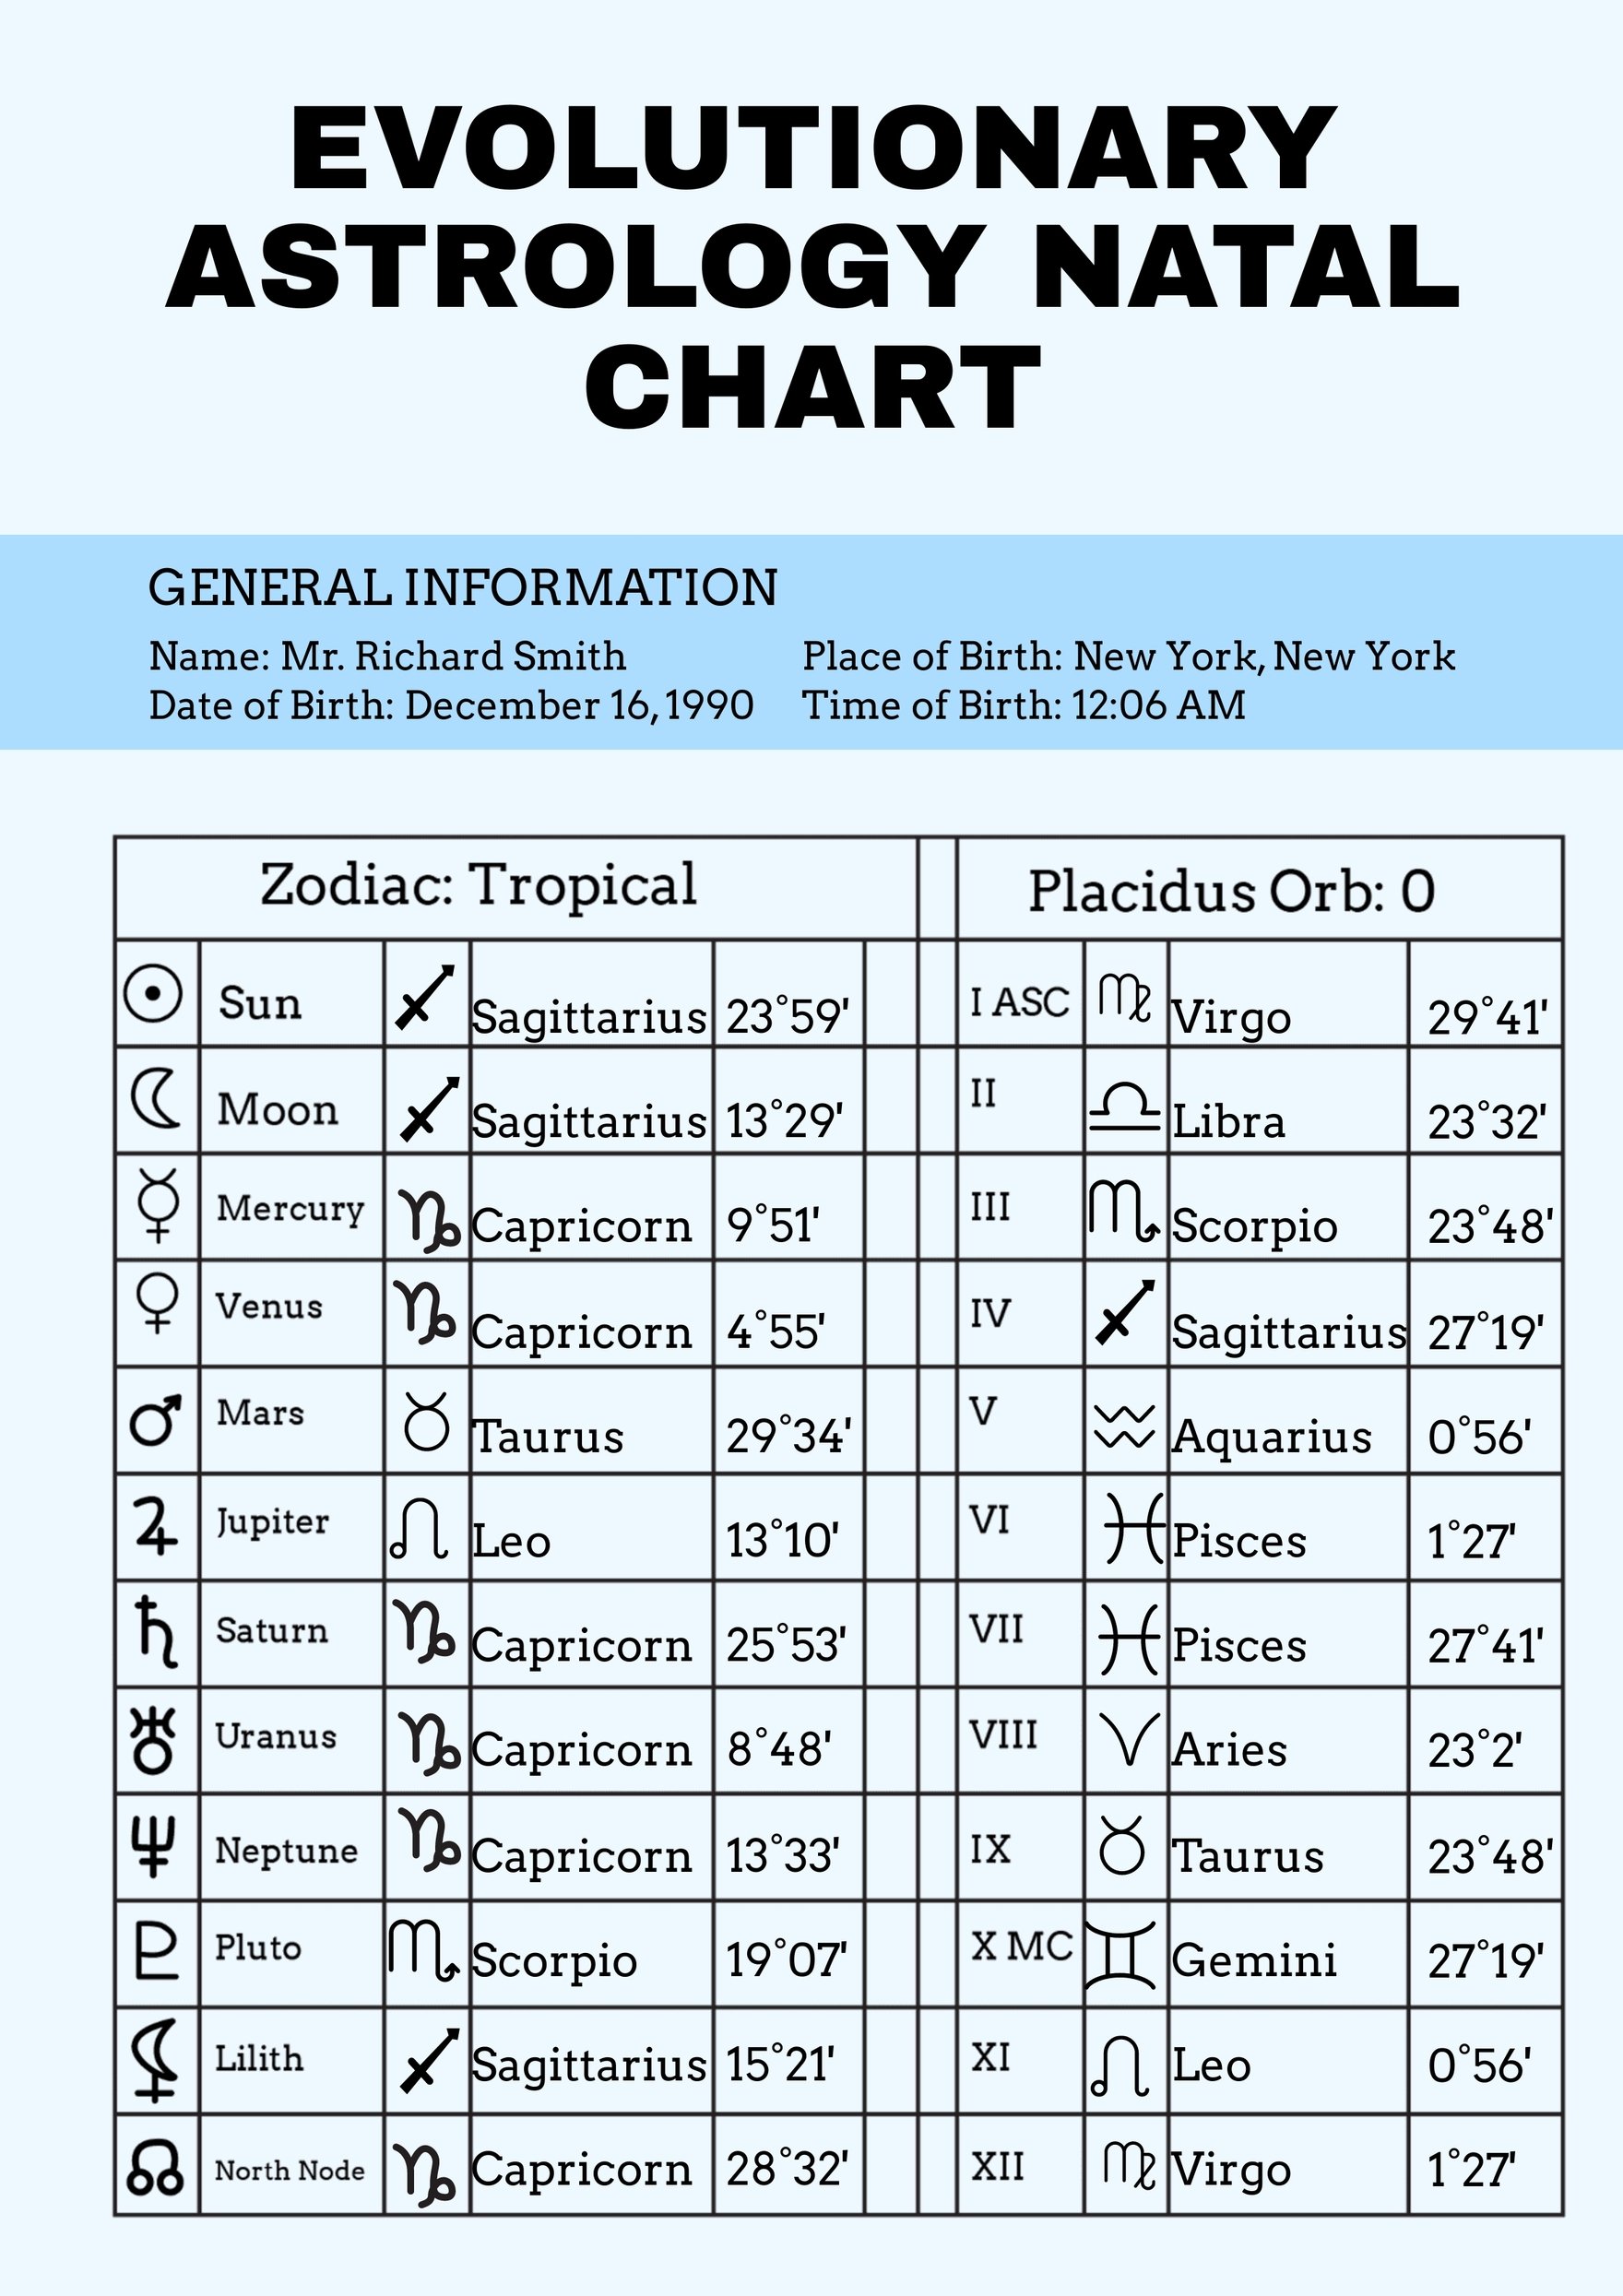 Blank Astrology Chart Template In Illustrator Pdf Download